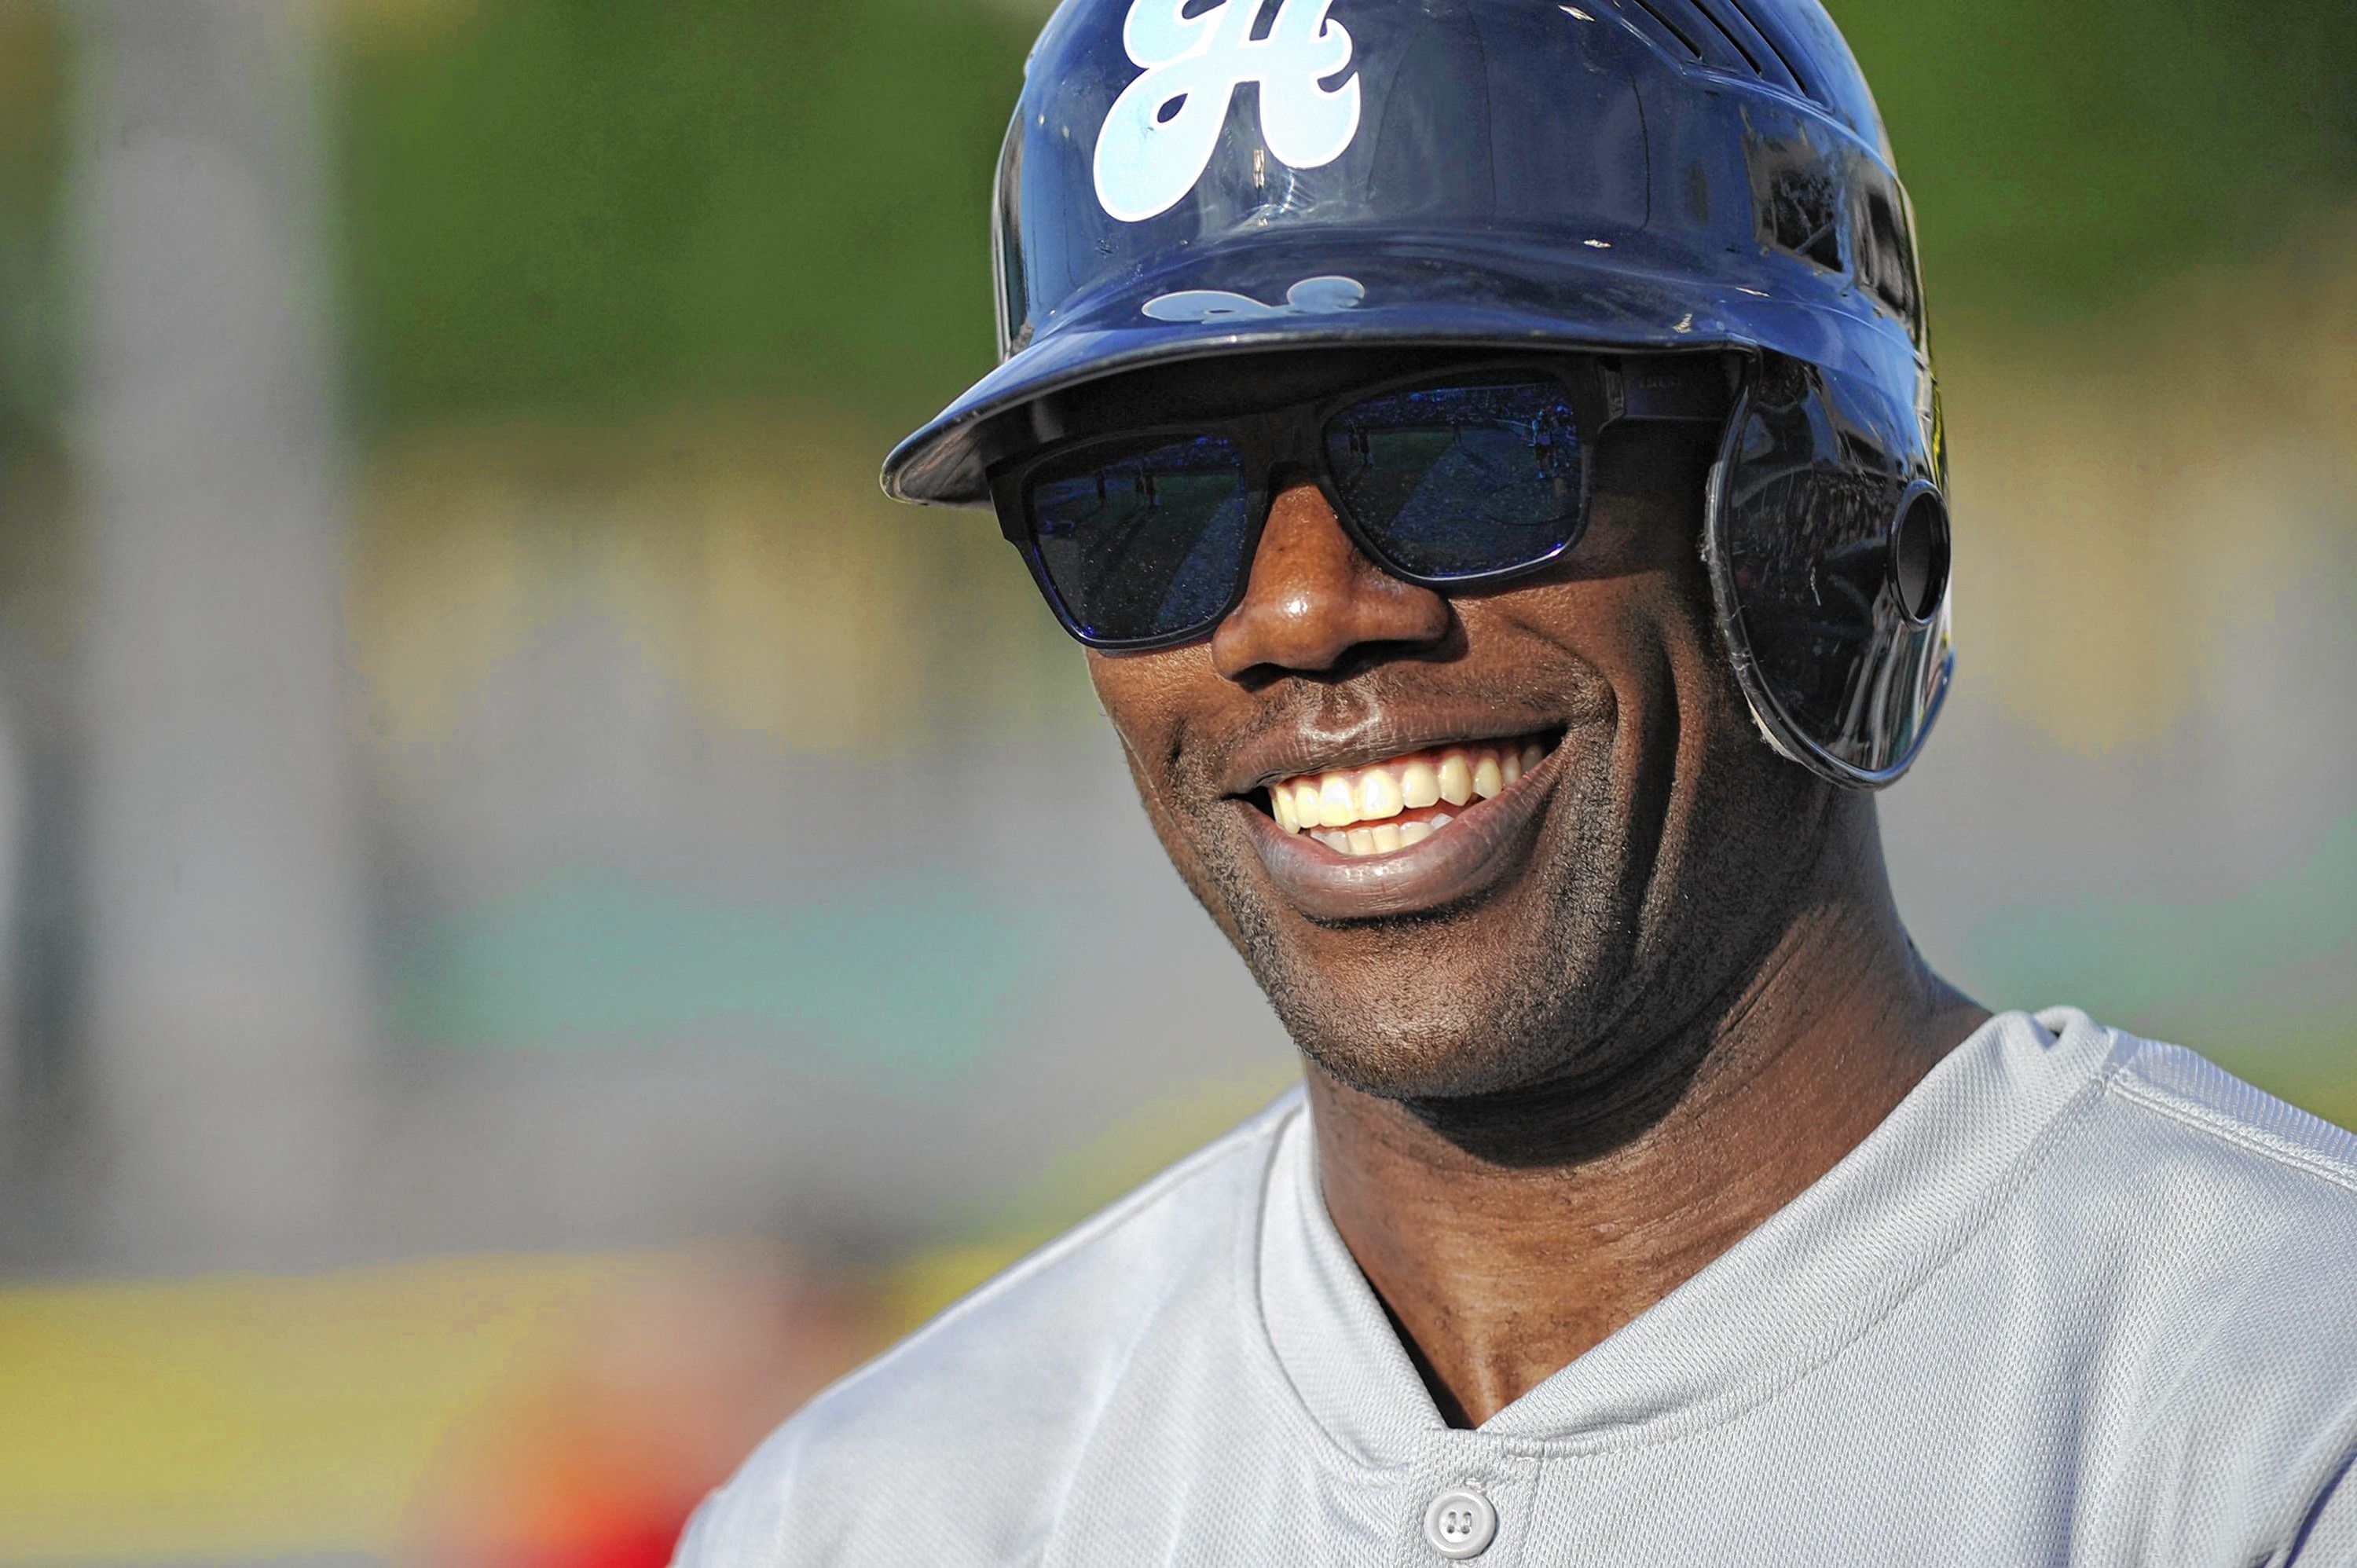 Former Dallas Cowboys wide receiver Terrell Owens appears during the Heroes Celebrity Baseball Game at Dr Pepper Ballpark in Frisco, Texas, Saturday, June 29, 2013. (Michael Prengler/Fort Worth Star-Telegram/MCT)